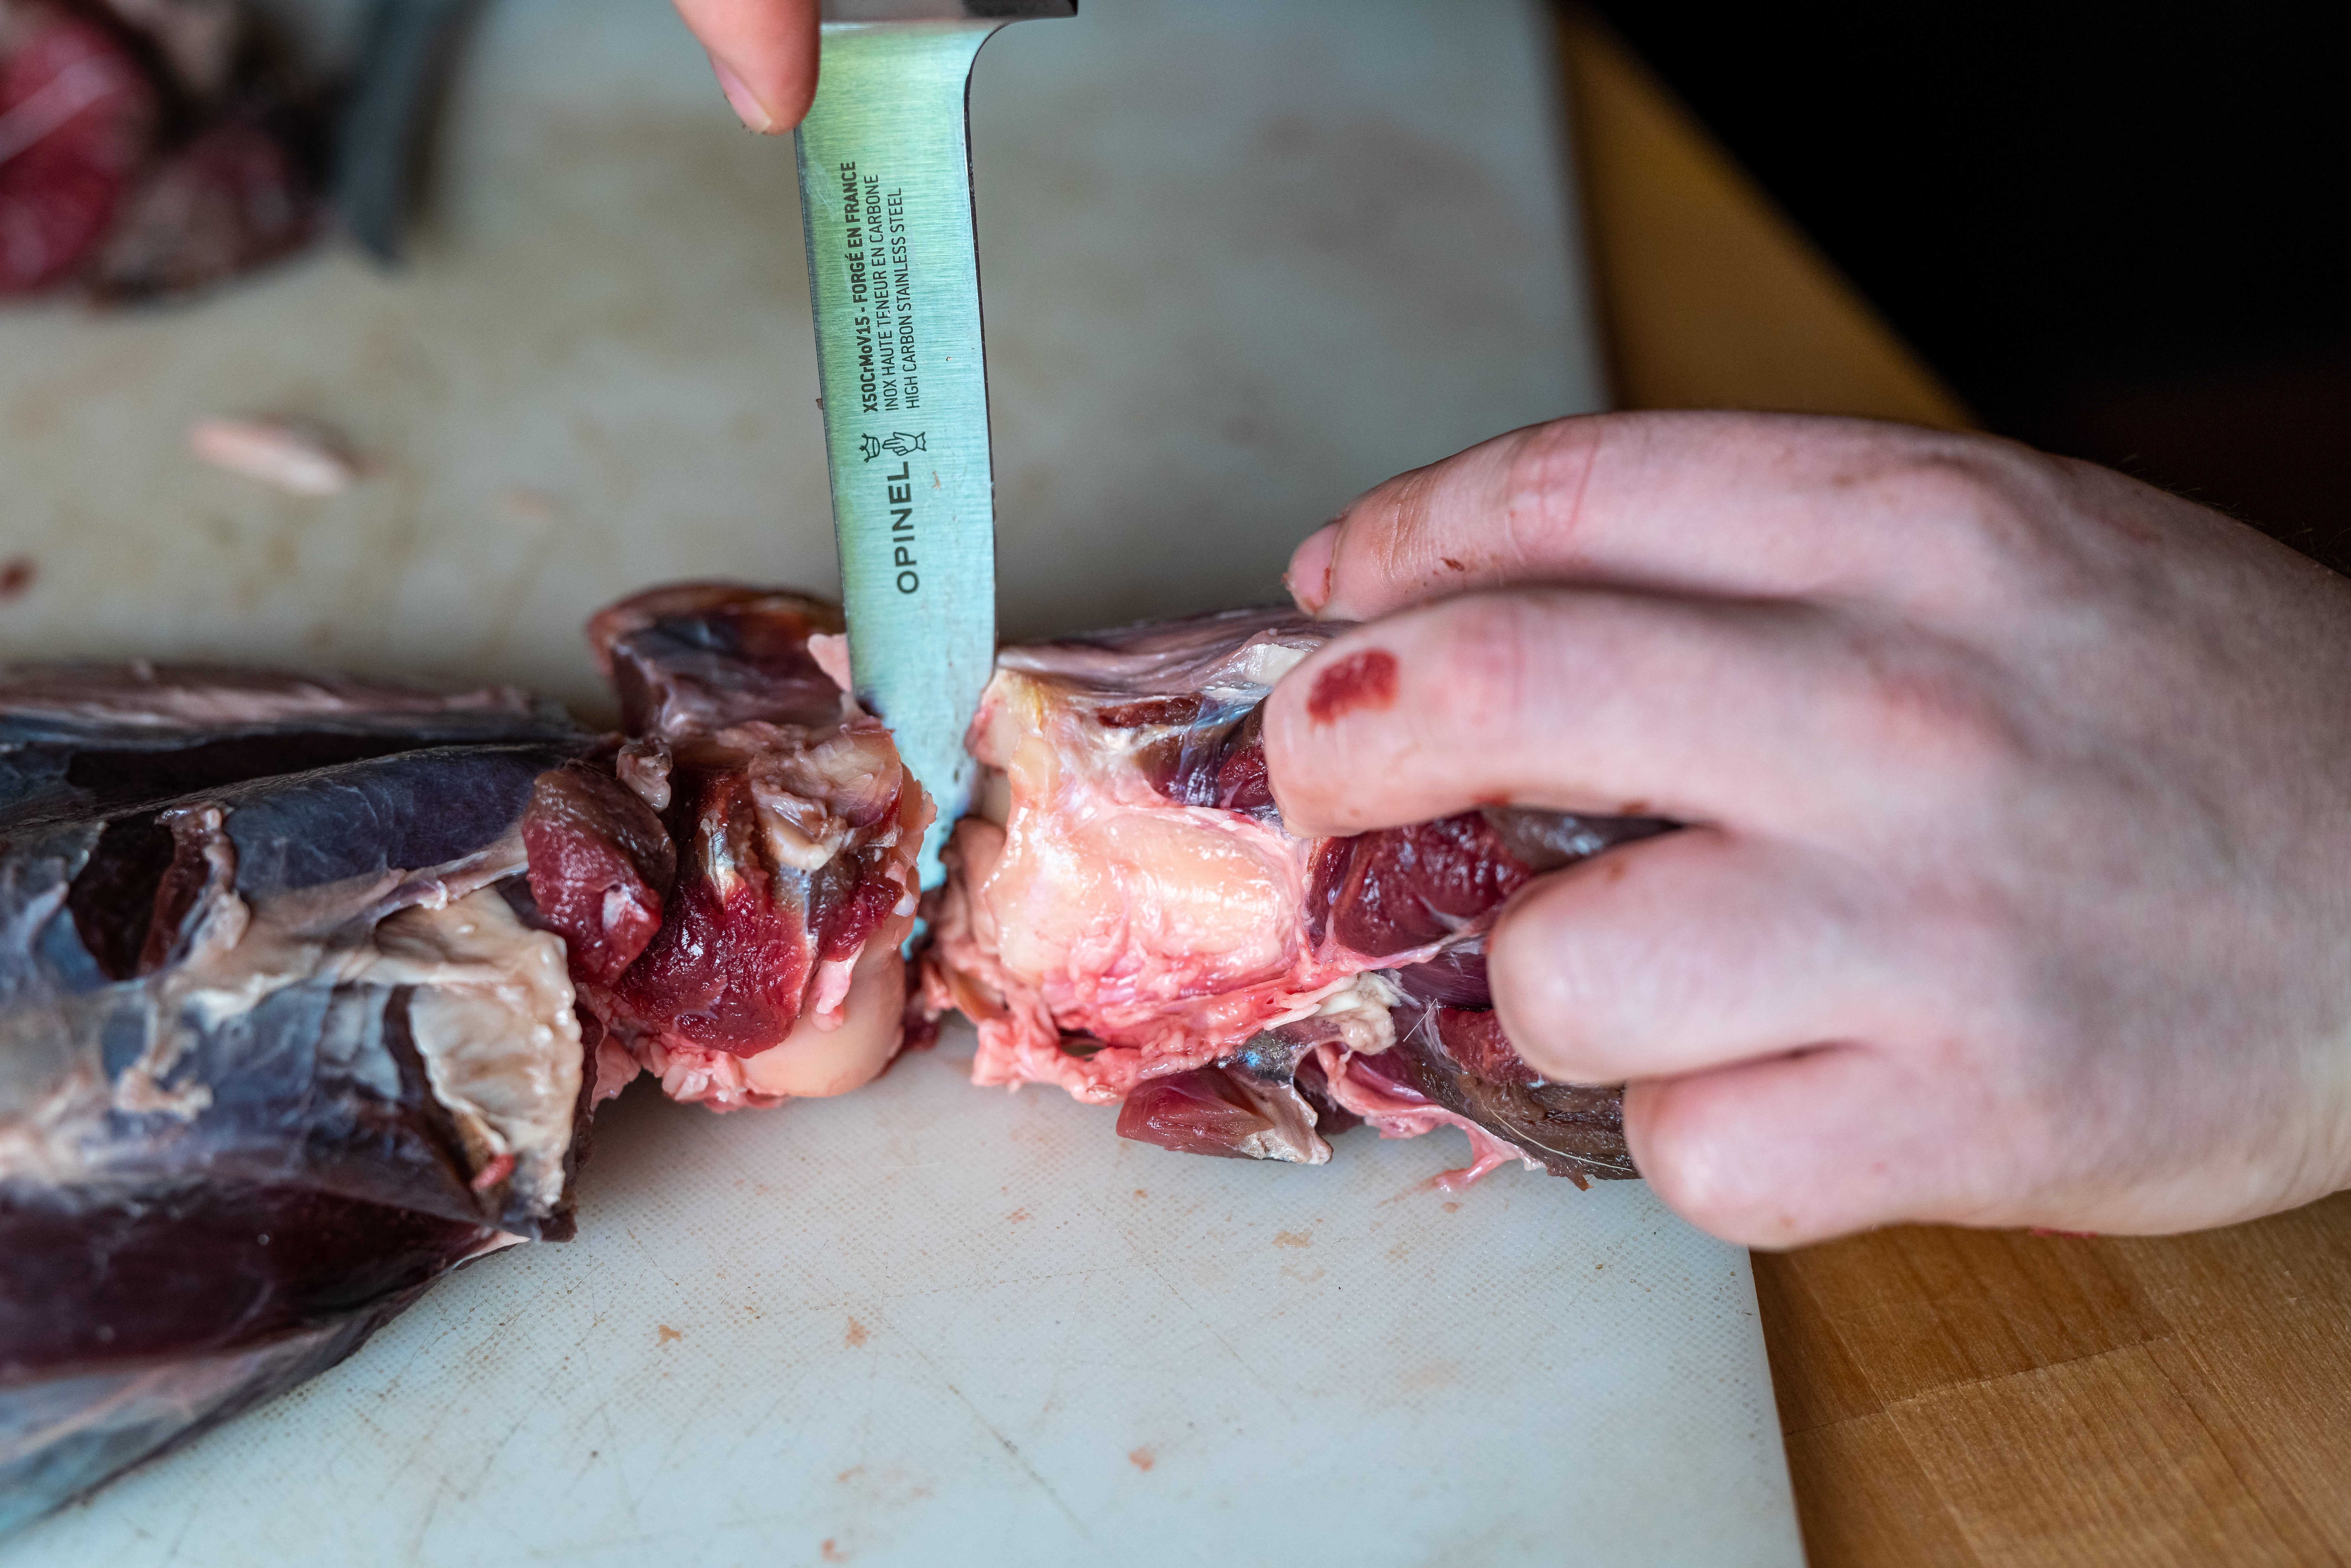 An Opinel 5-inch boning knife being worked through a joint.